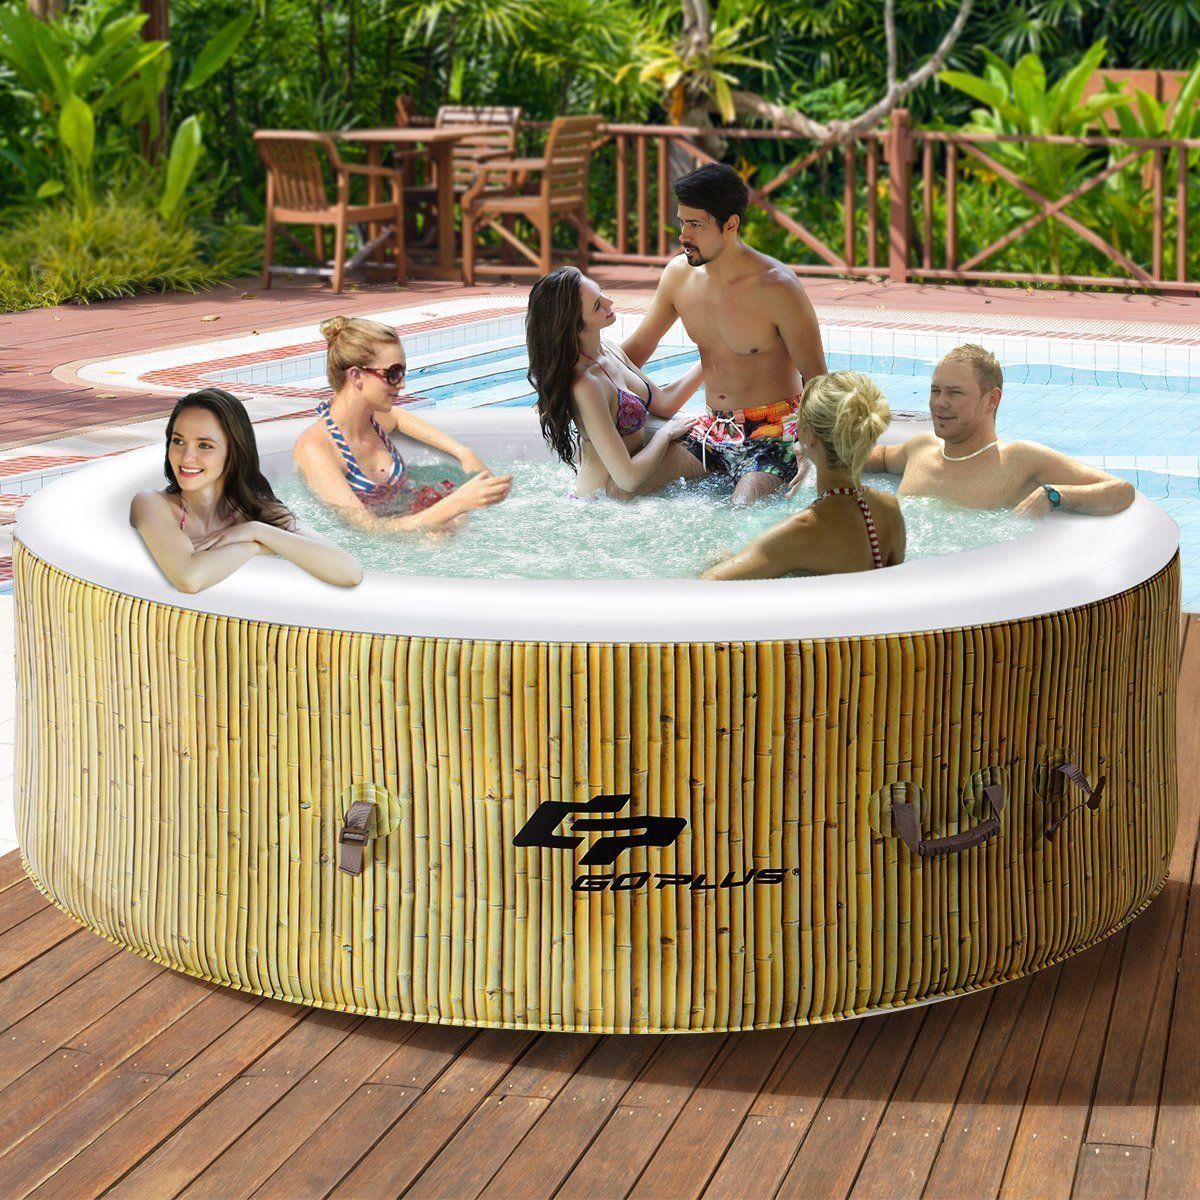 Jacuzzi, Jacuzzis, Hot Tub, Hot Tubs, Hot Tubs For sale, Buy hot Tub ...